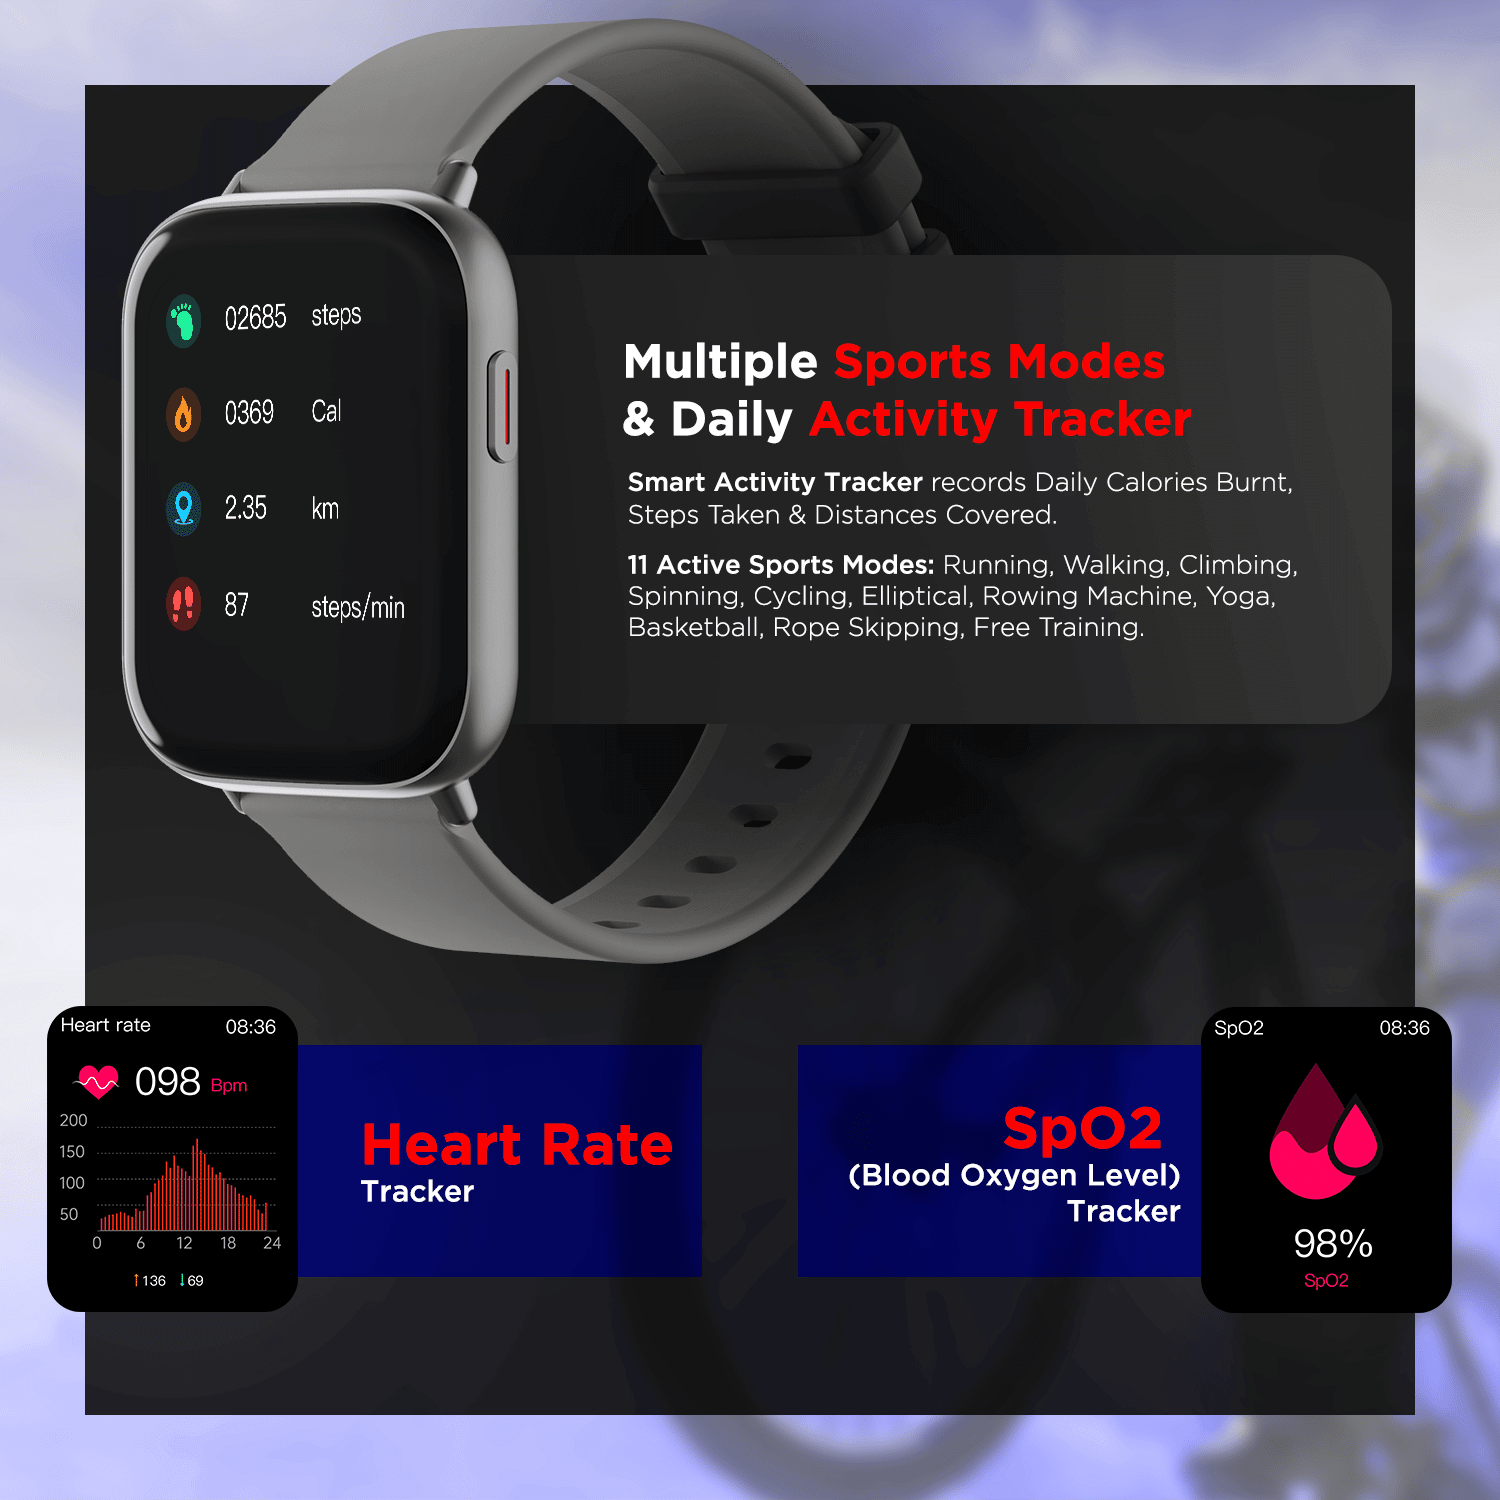 boAt Matrix | 1.65" (4.18 cm) colour AMOLED Display, Fitness Tracking, 100+ Cloud Watch Faces